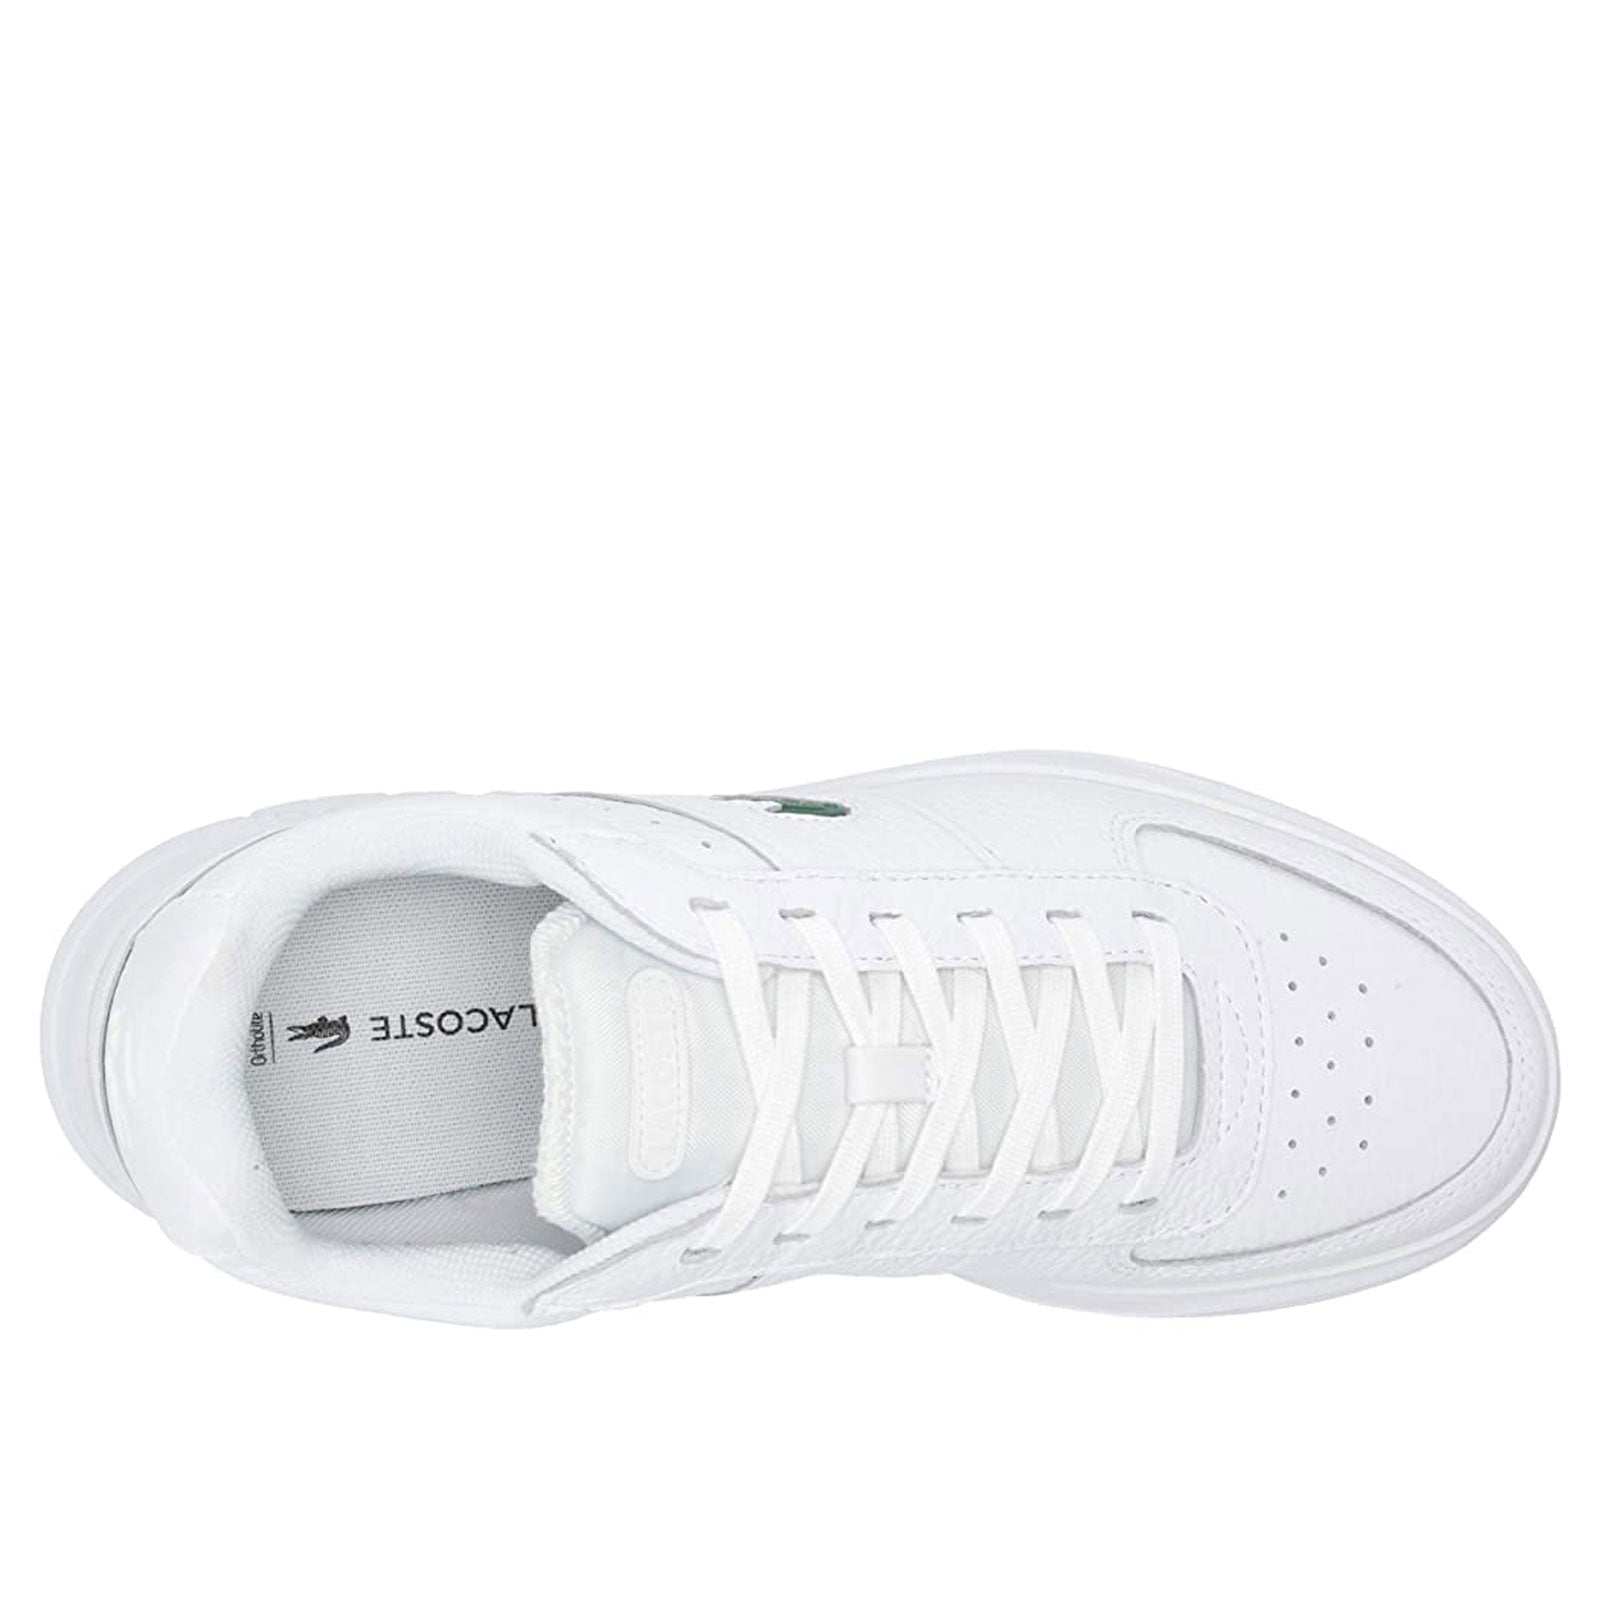 Lacoste game advance sneakers in triple white